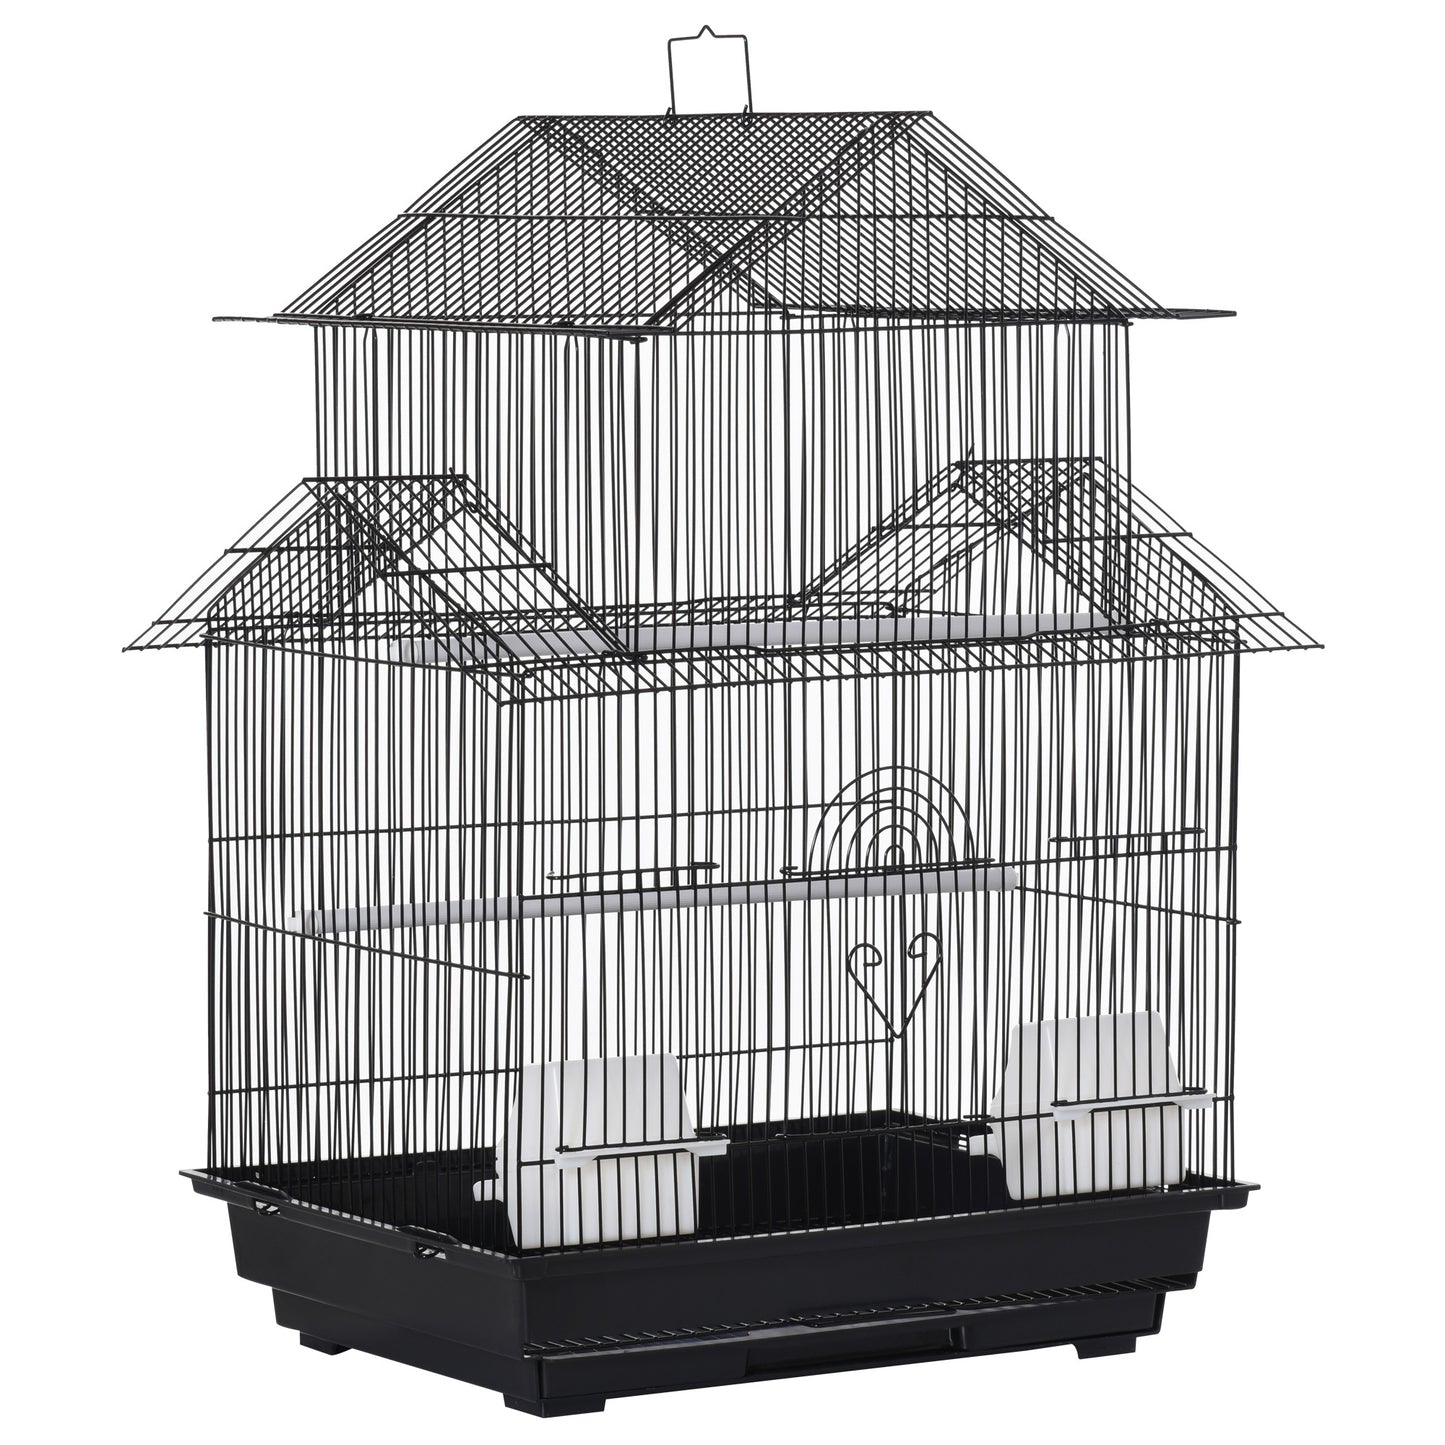 PawHut Metal Bird Cage w/ Plastic Perch Food Container Handle Small 51 x 40 x 67cm Black